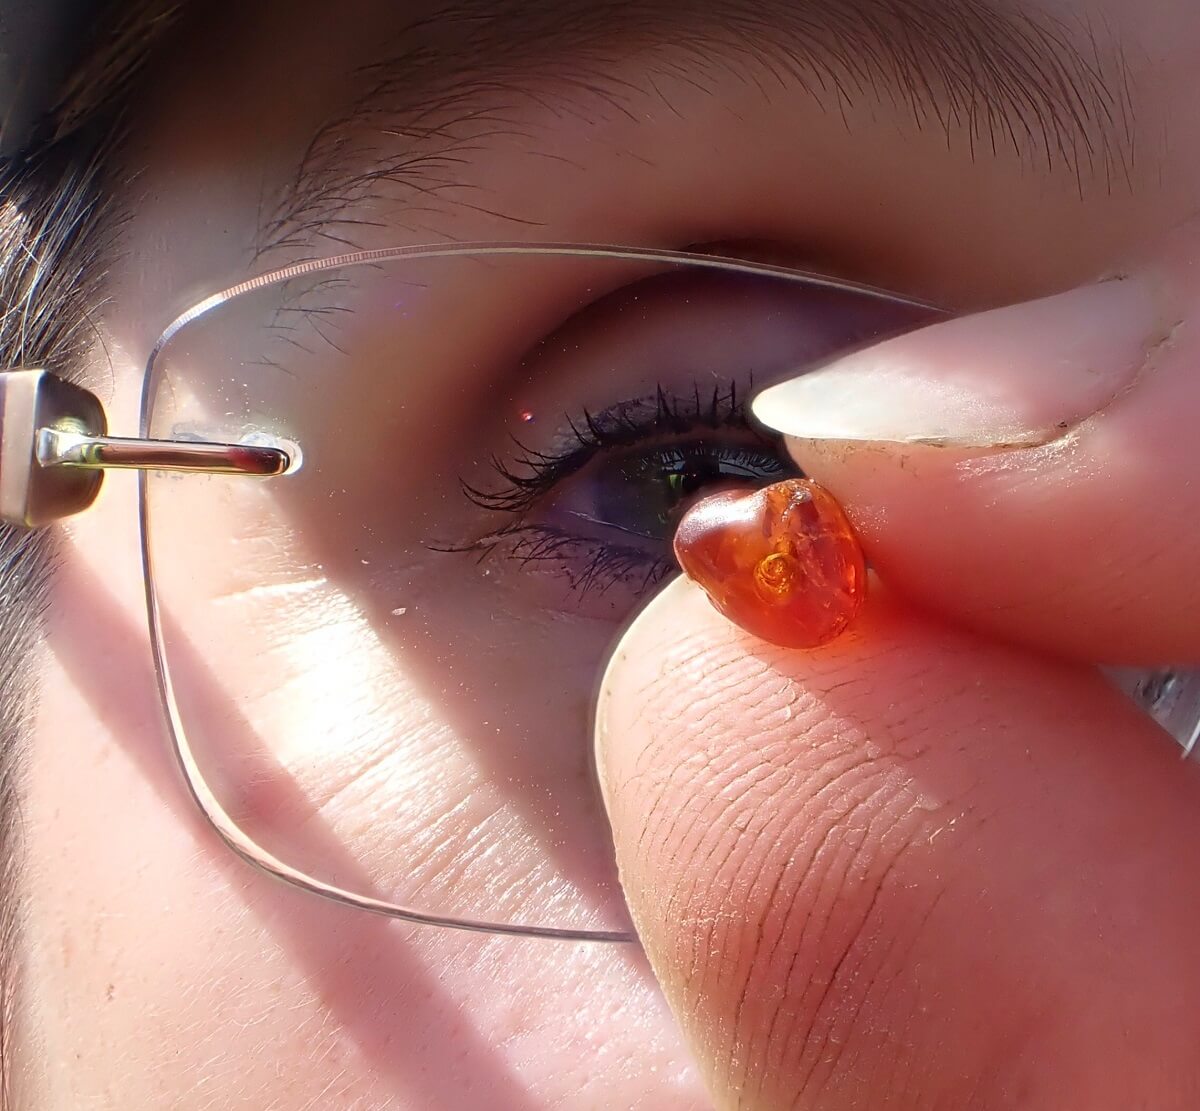 holding a piece of prehistoric amber up to her eye